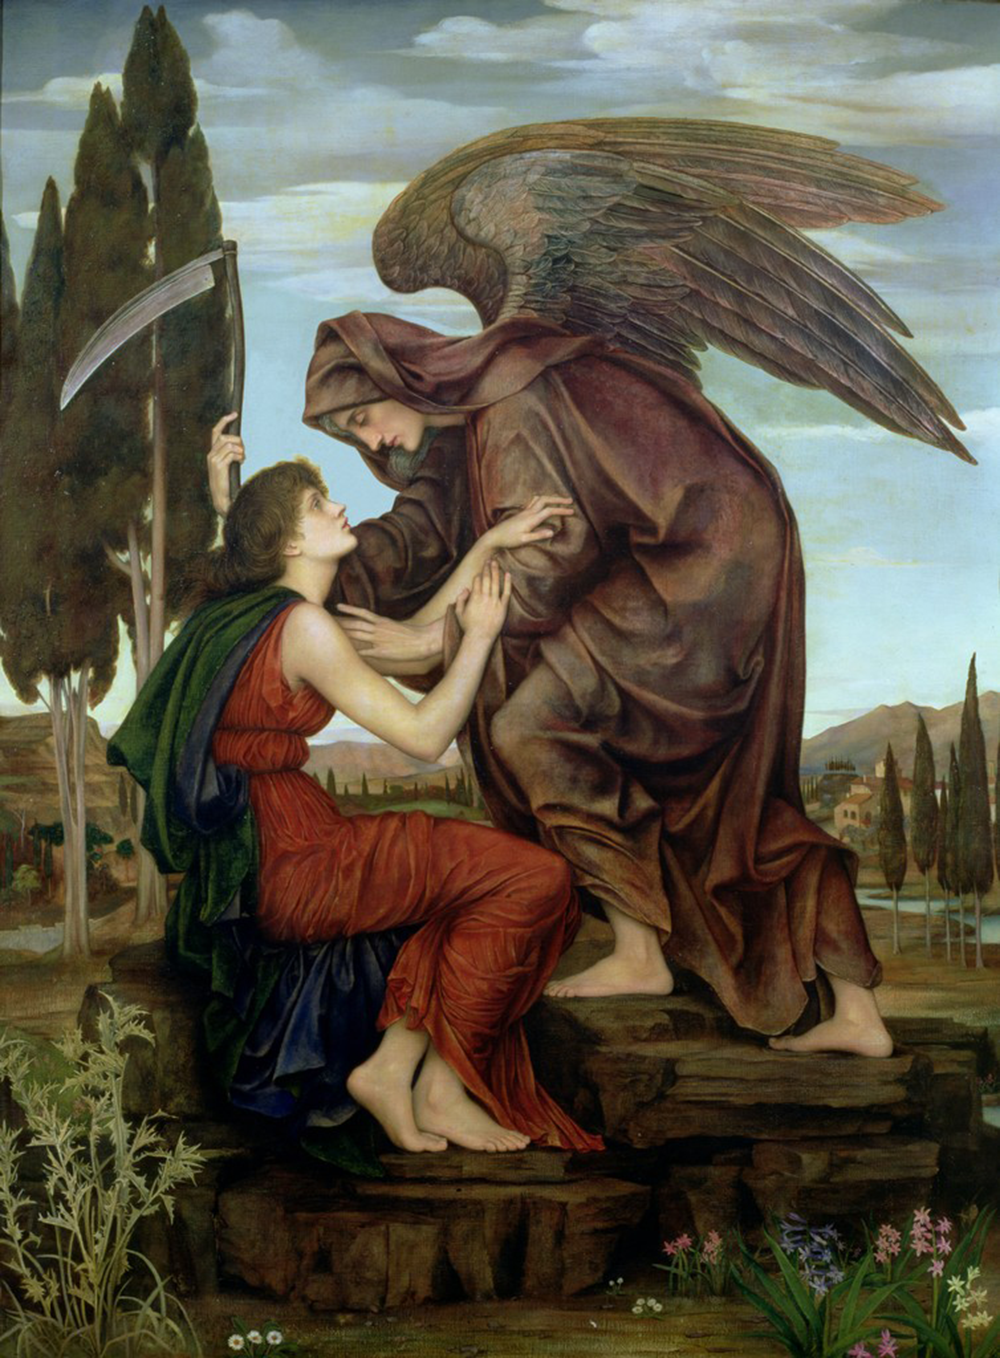 An artistic depiction of the angel of death, by Evelyn De Morgan, 1881.